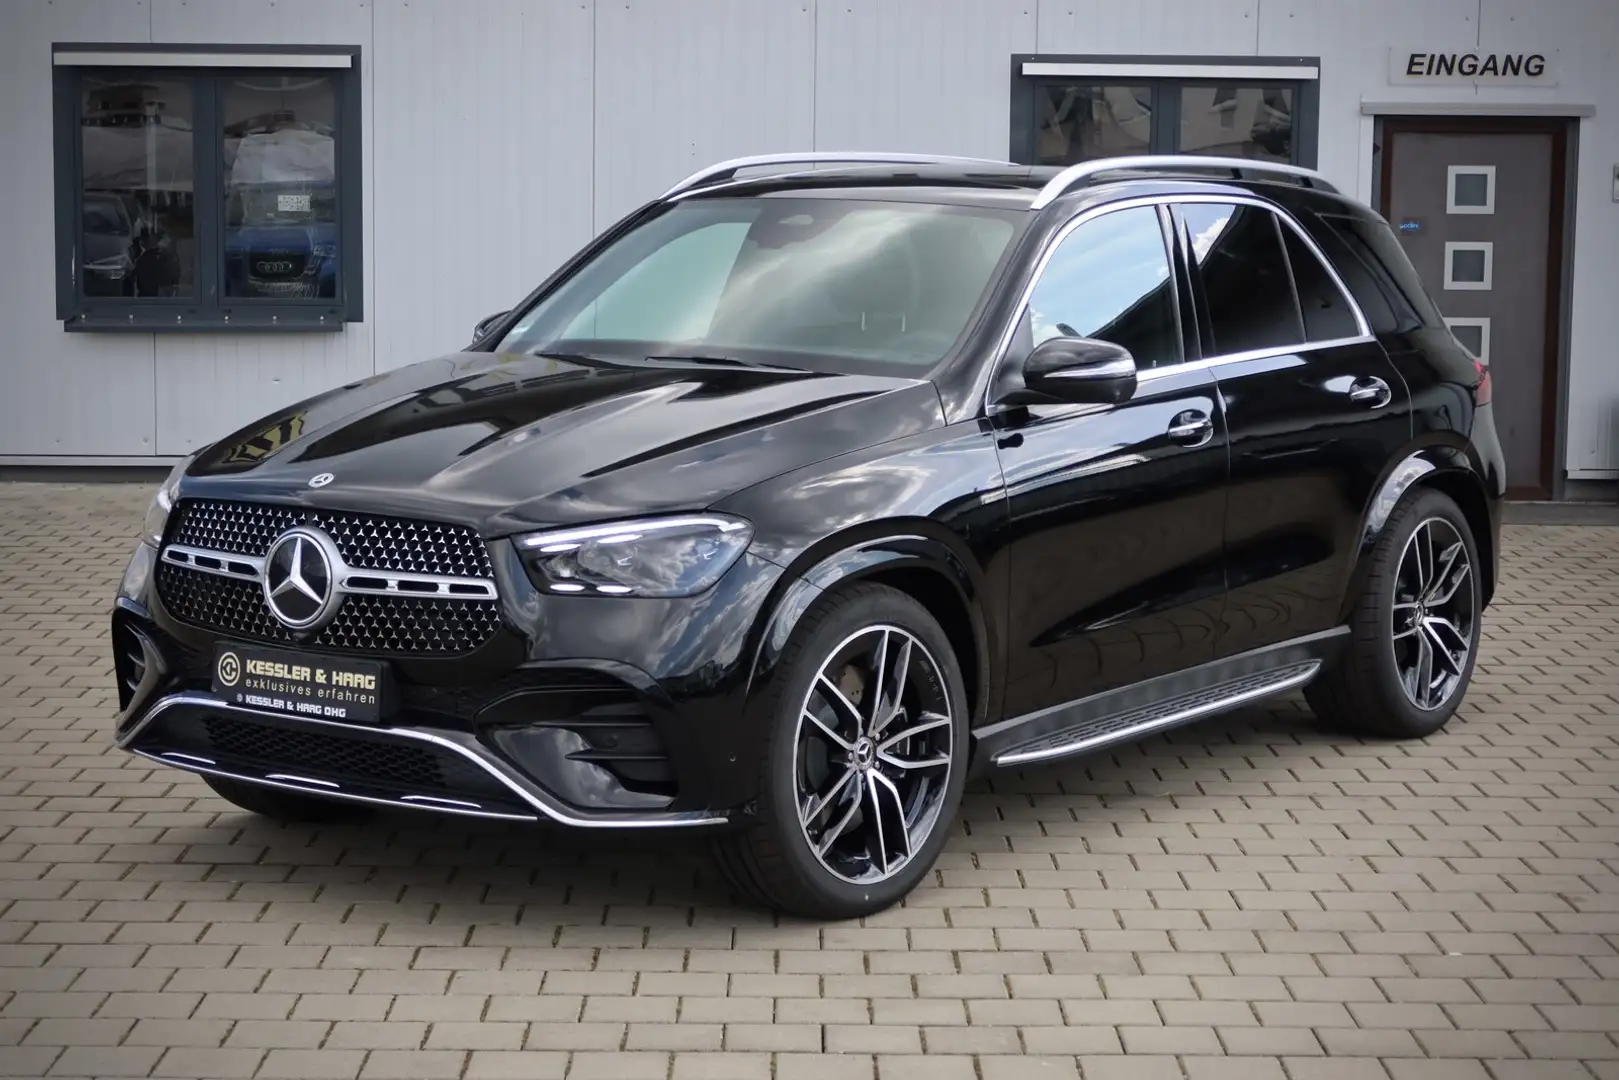 Mercedes-Benz GLE 450 4Matic AMG Line #PANO#AIRMATIC#FACELIFT# Zwart - 2